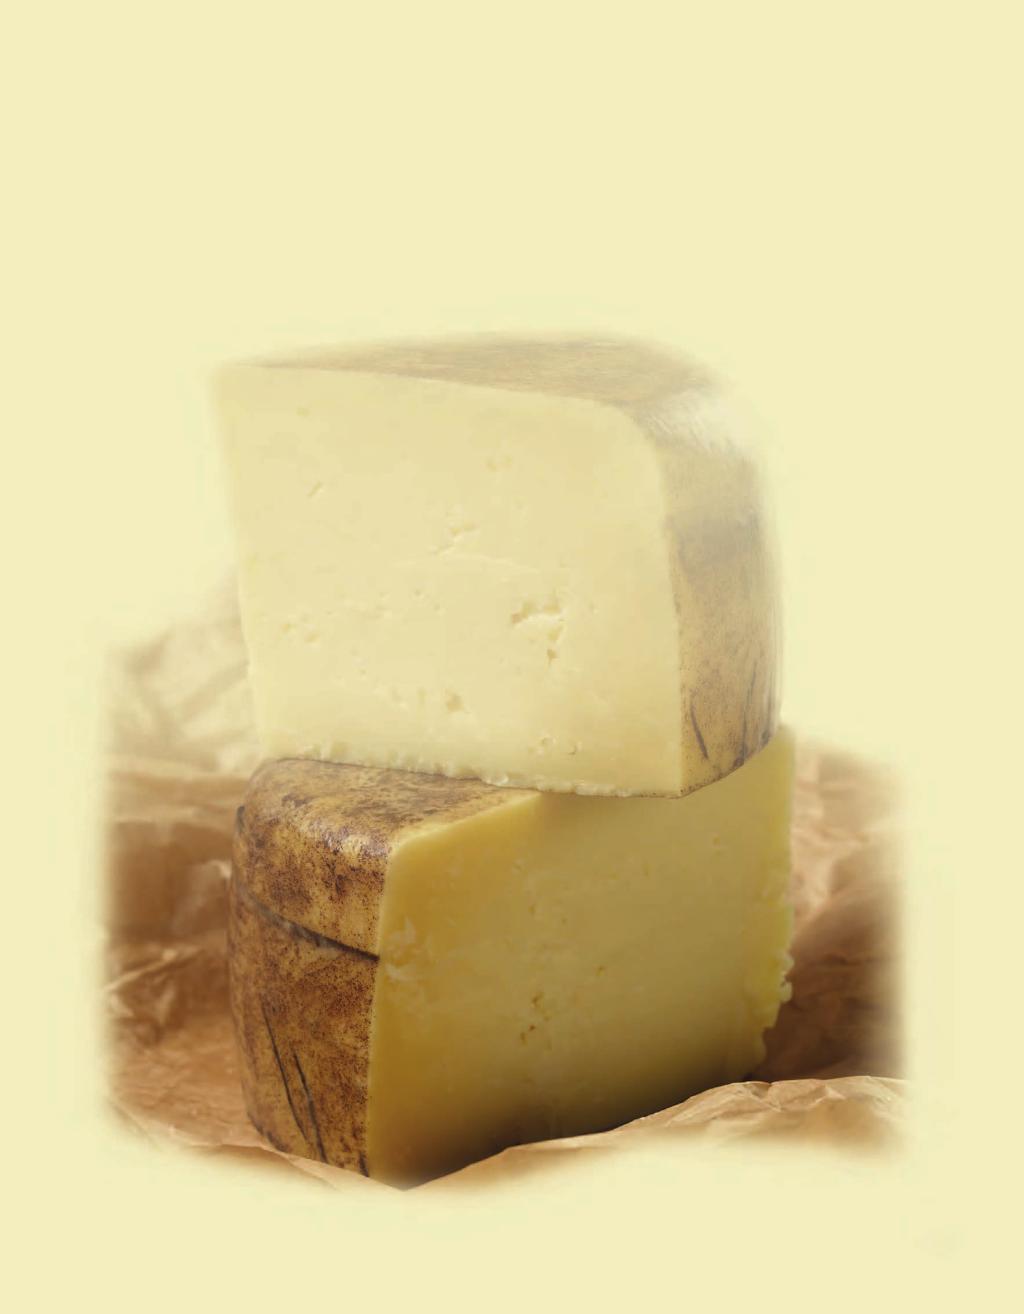 FORGING THE LEGACY WITH INNOVATION In the last several decades small artisan cheese makers all over the U.S.